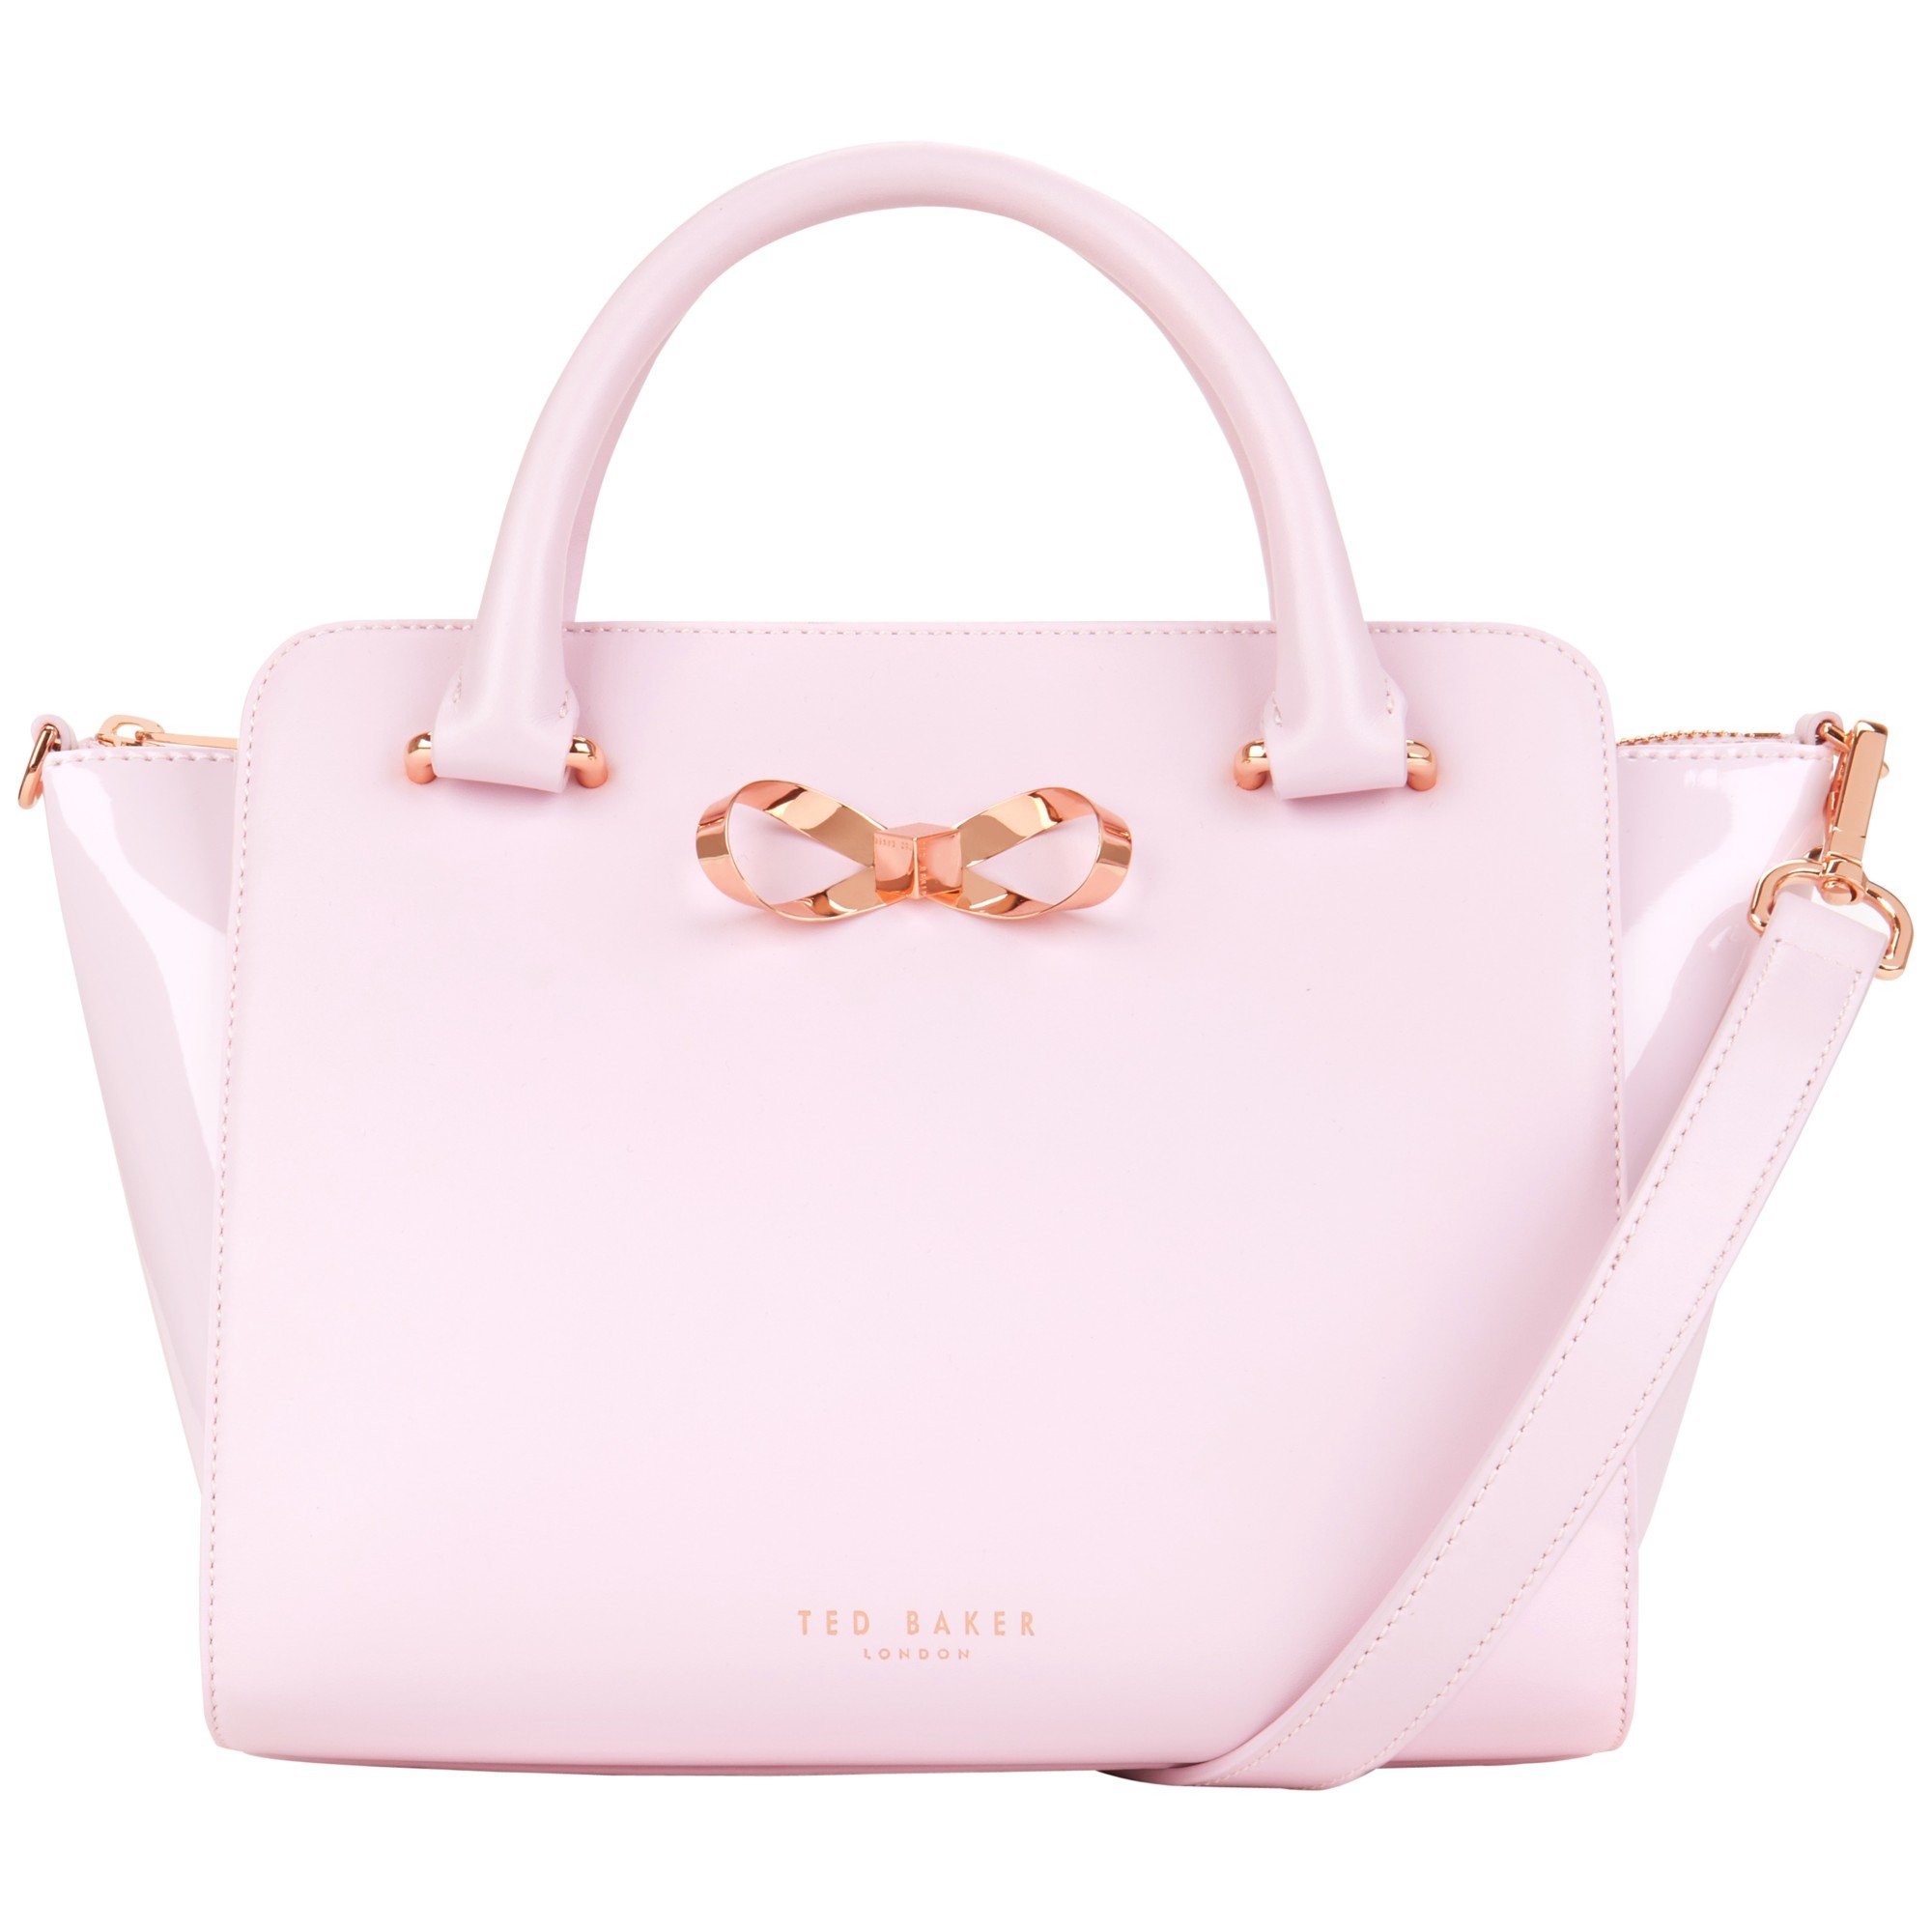 Ted Baker Paiton Bow Leather Tote Bag in Pink - Lyst